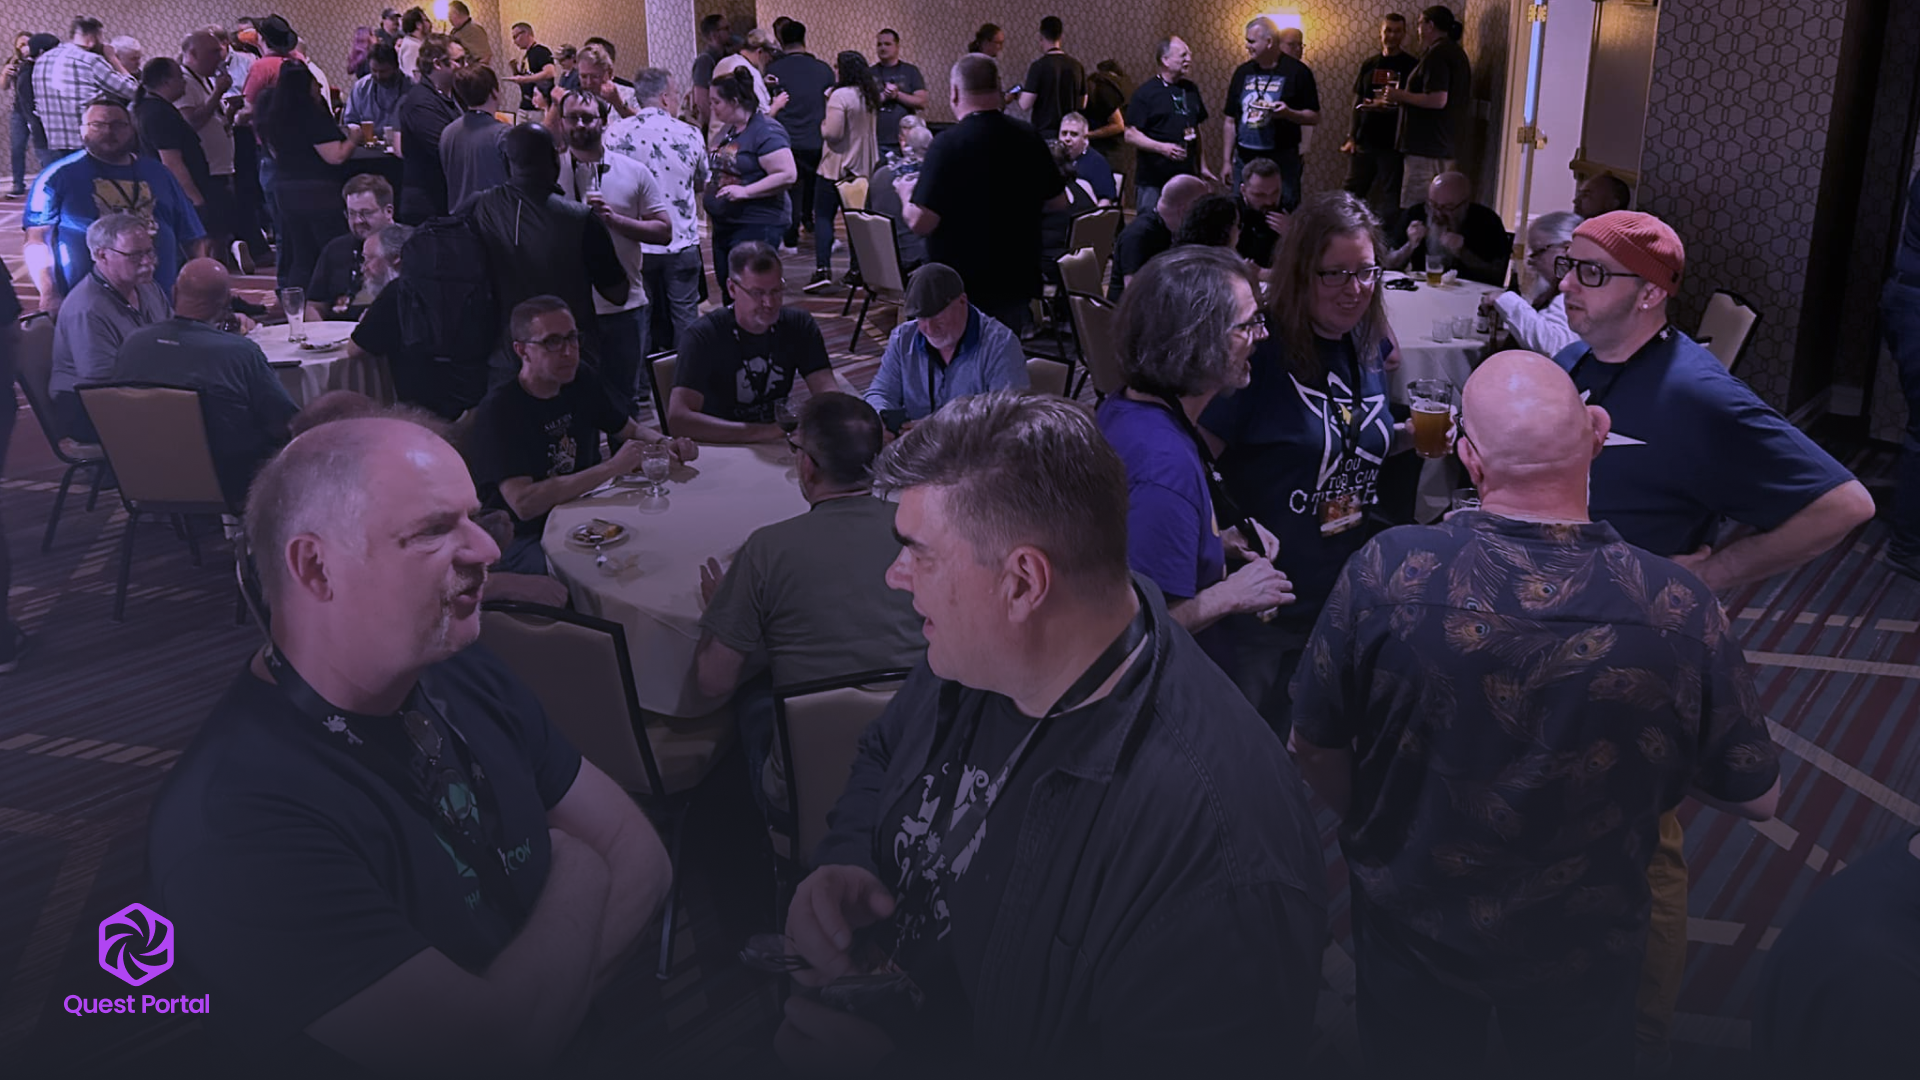 A photo from Chaosium Con. Photo by Marc McVey - @marcmcvey